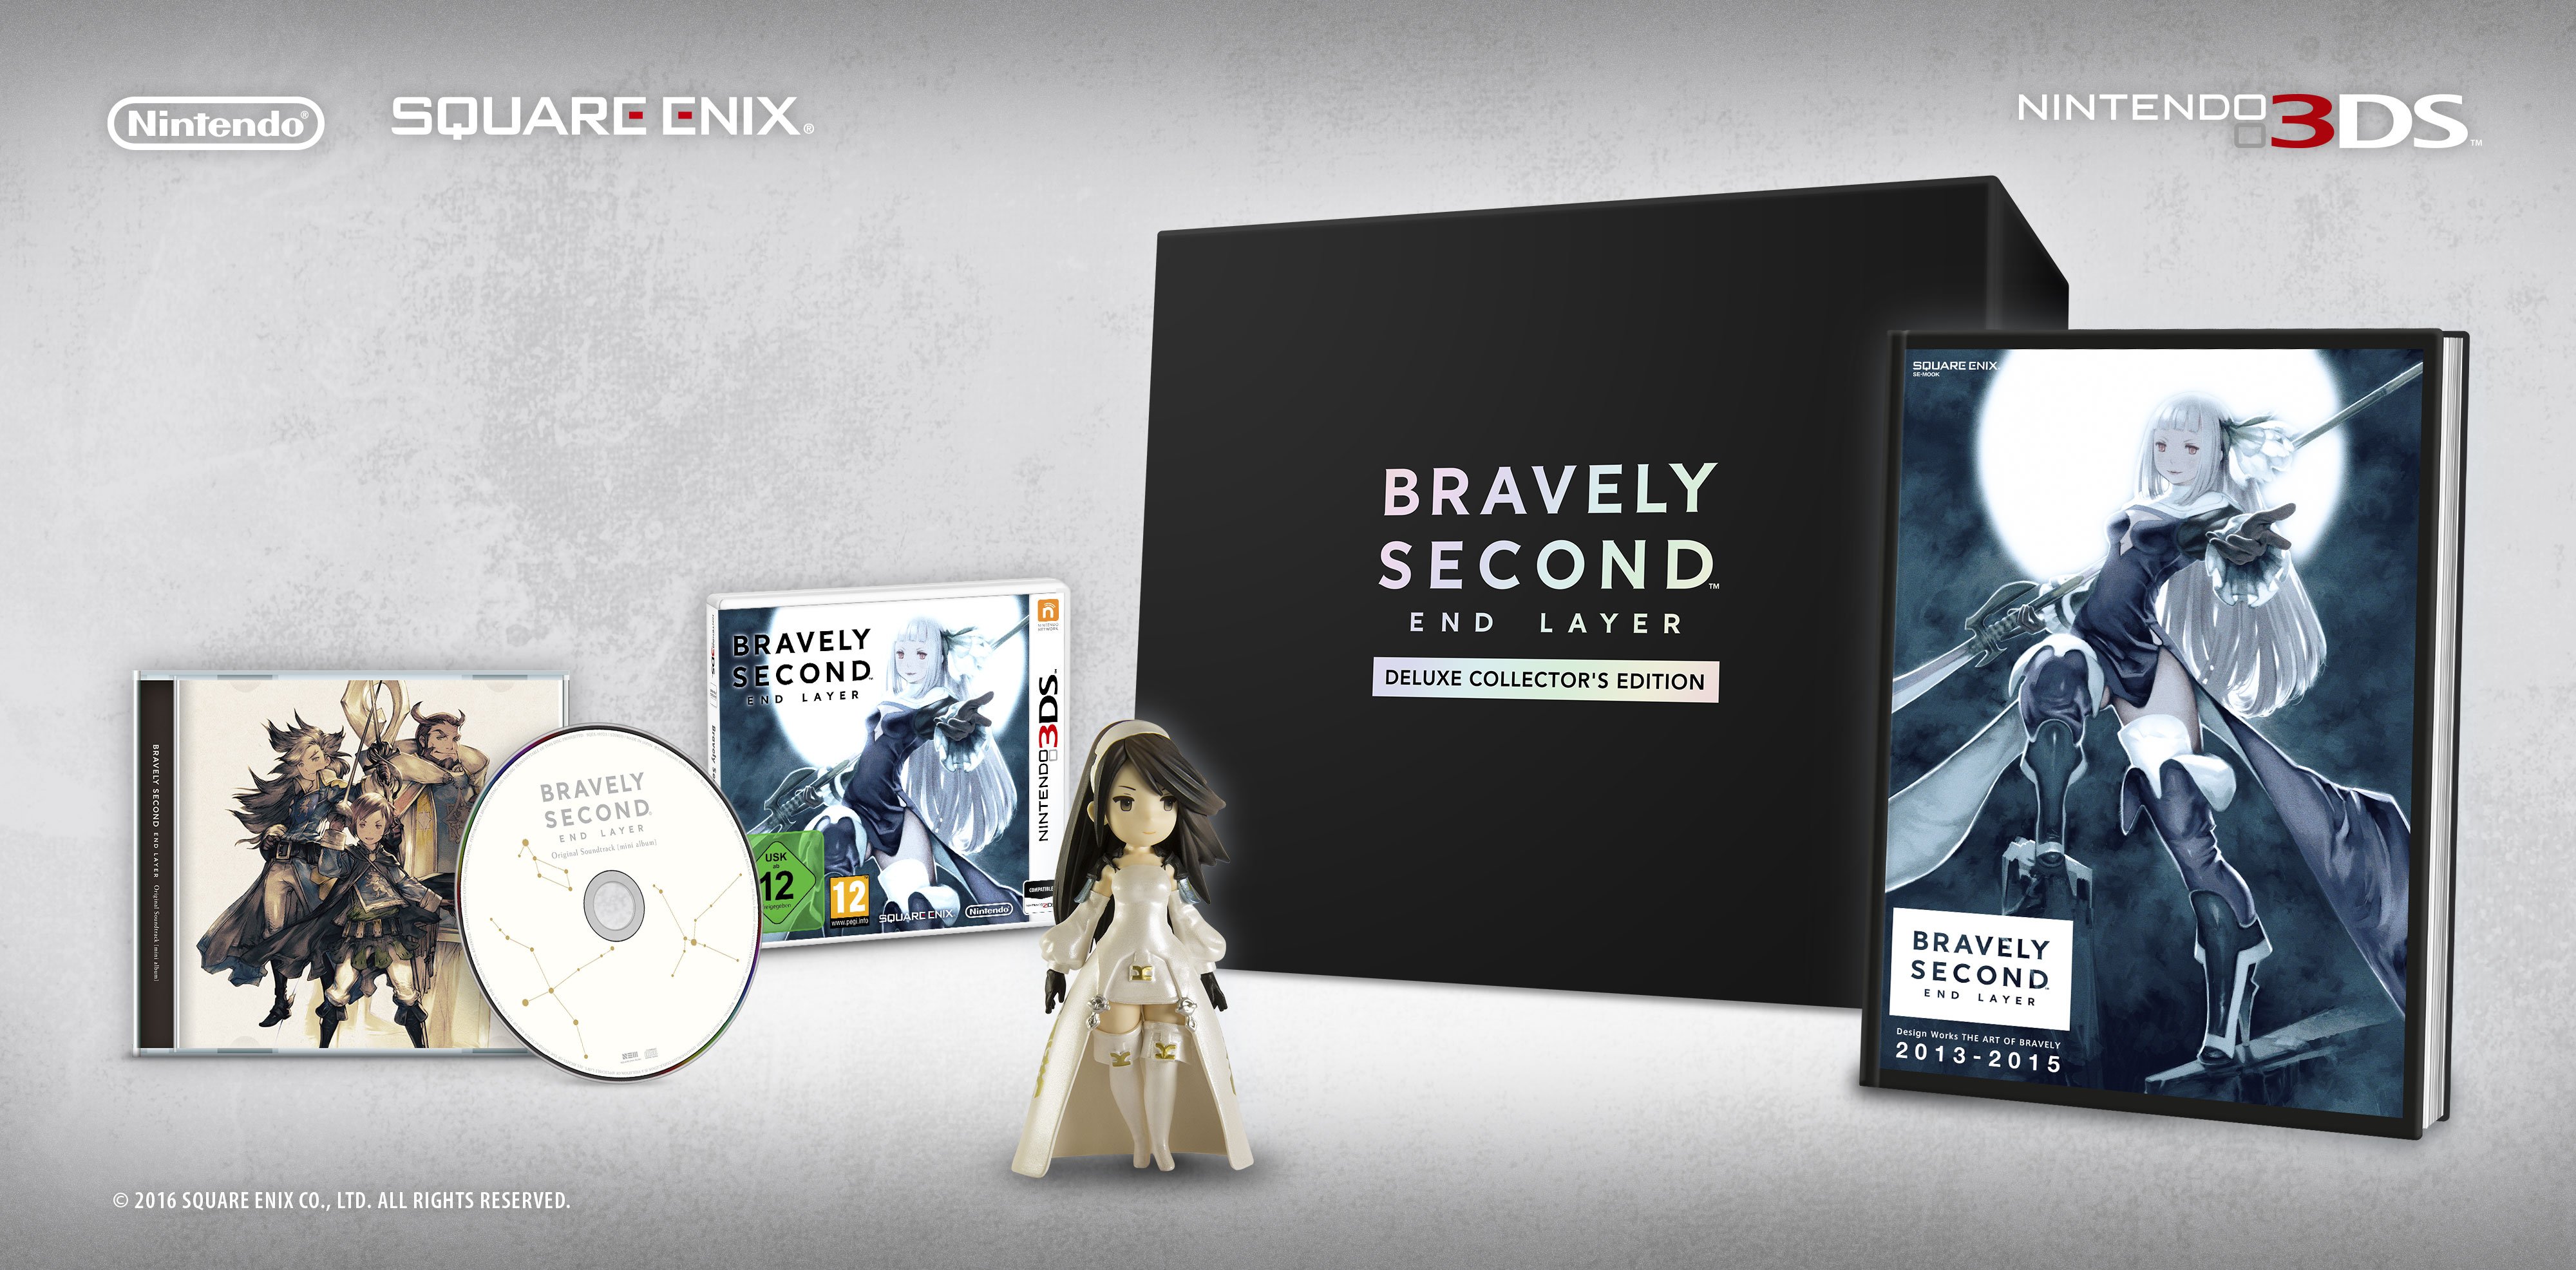 “Bravely Second” European Release Date Revealed - US Release Date Not Yet Revealed